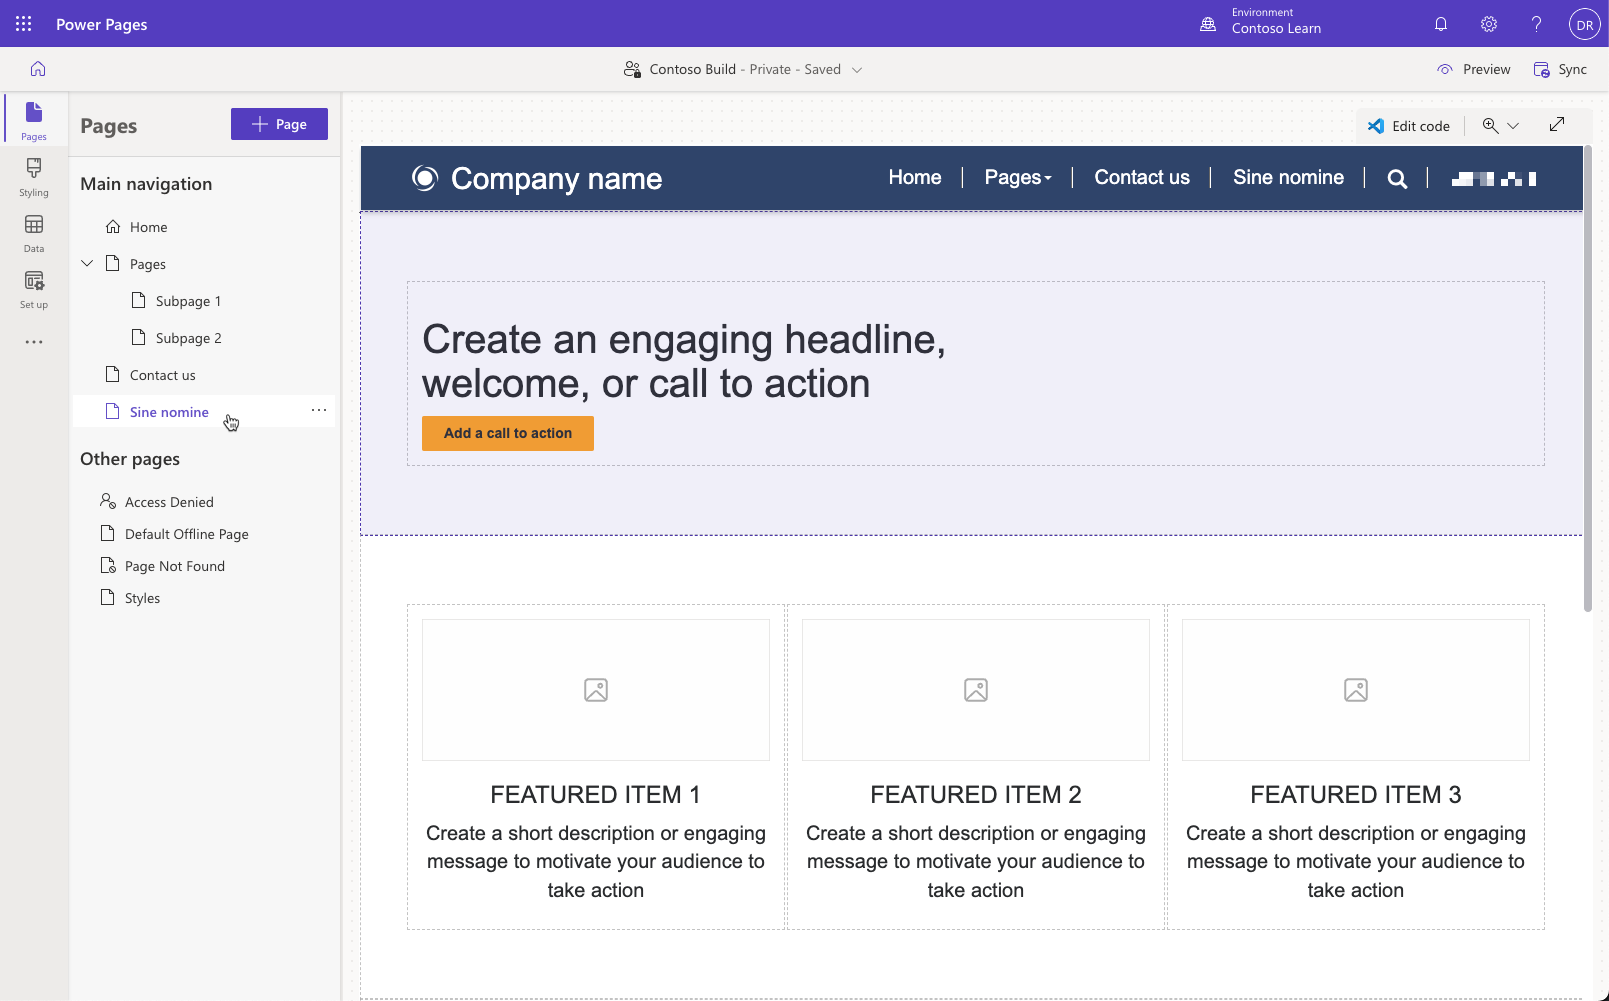 Screenshot of page created with the landing page layout.